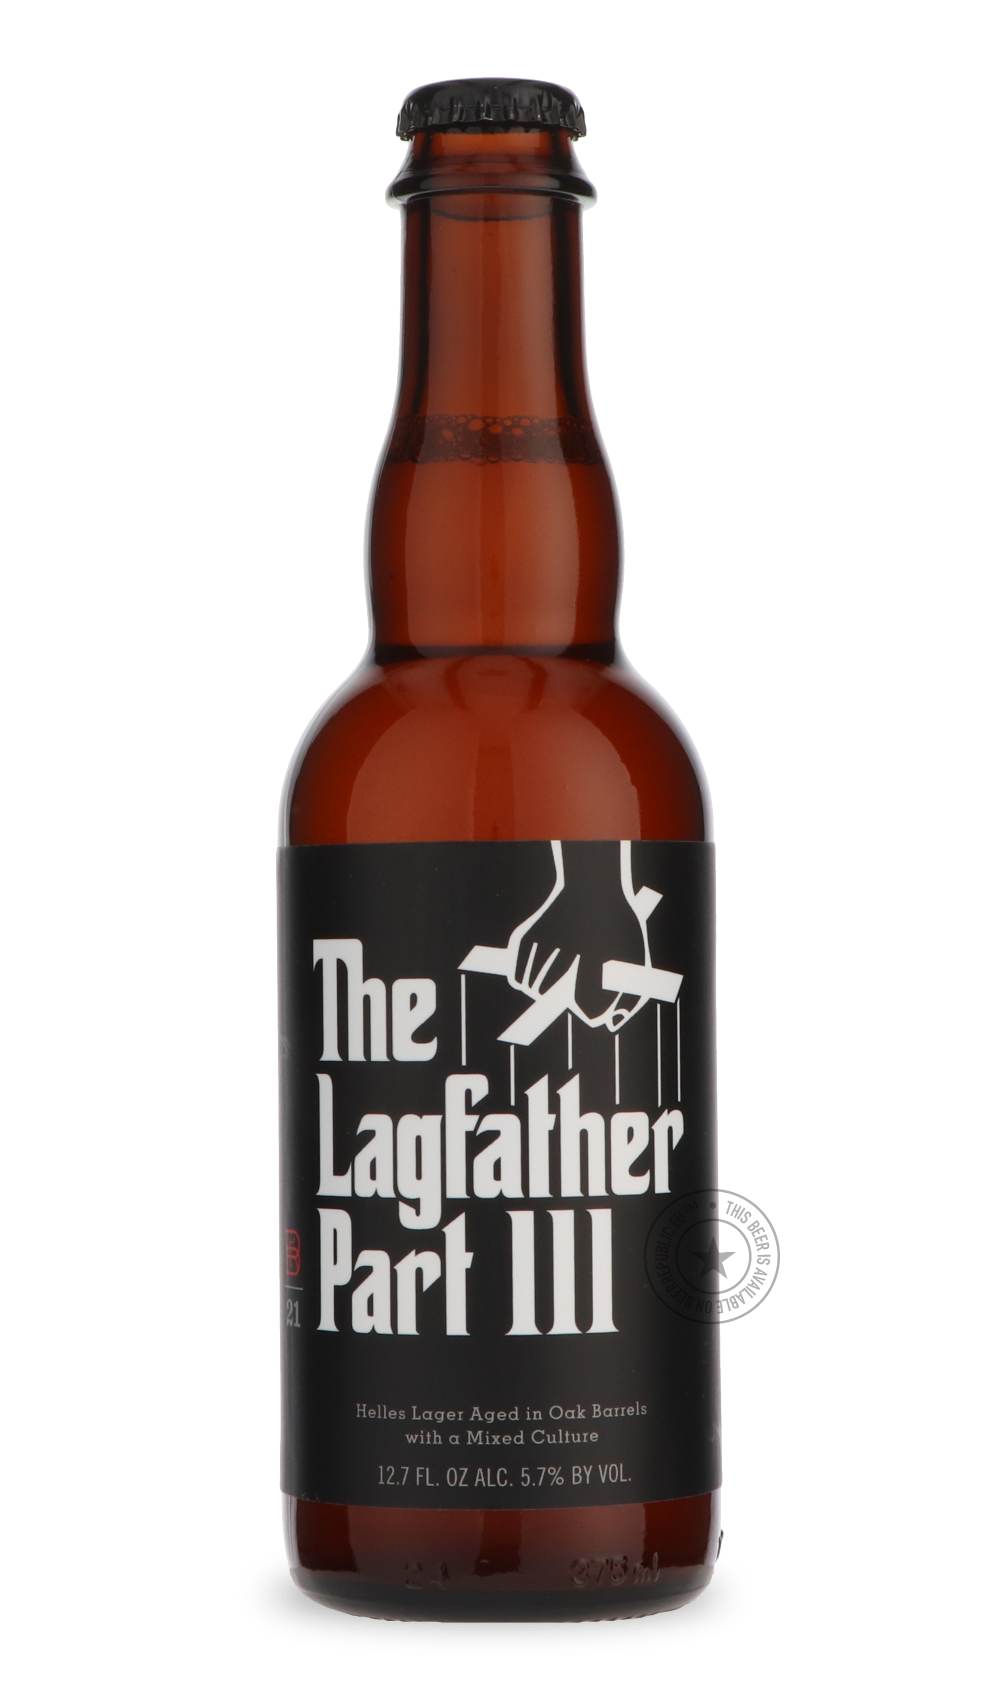 -The Rare Barrel- The Lagfather Part III / Laughing Monk-Sour / Wild & Fruity- Only @ Beer Republic - The best online beer store for American & Canadian craft beer - Buy beer online from the USA and Canada - Bier online kopen - Amerikaans bier kopen - Craft beer store - Craft beer kopen - Amerikanisch bier kaufen - Bier online kaufen - Acheter biere online - IPA - Stout - Porter - New England IPA - Hazy IPA - Imperial Stout - Barrel Aged - Barrel Aged Imperial Stout - Brown - Dark beer - Blond - Blonde - Pi